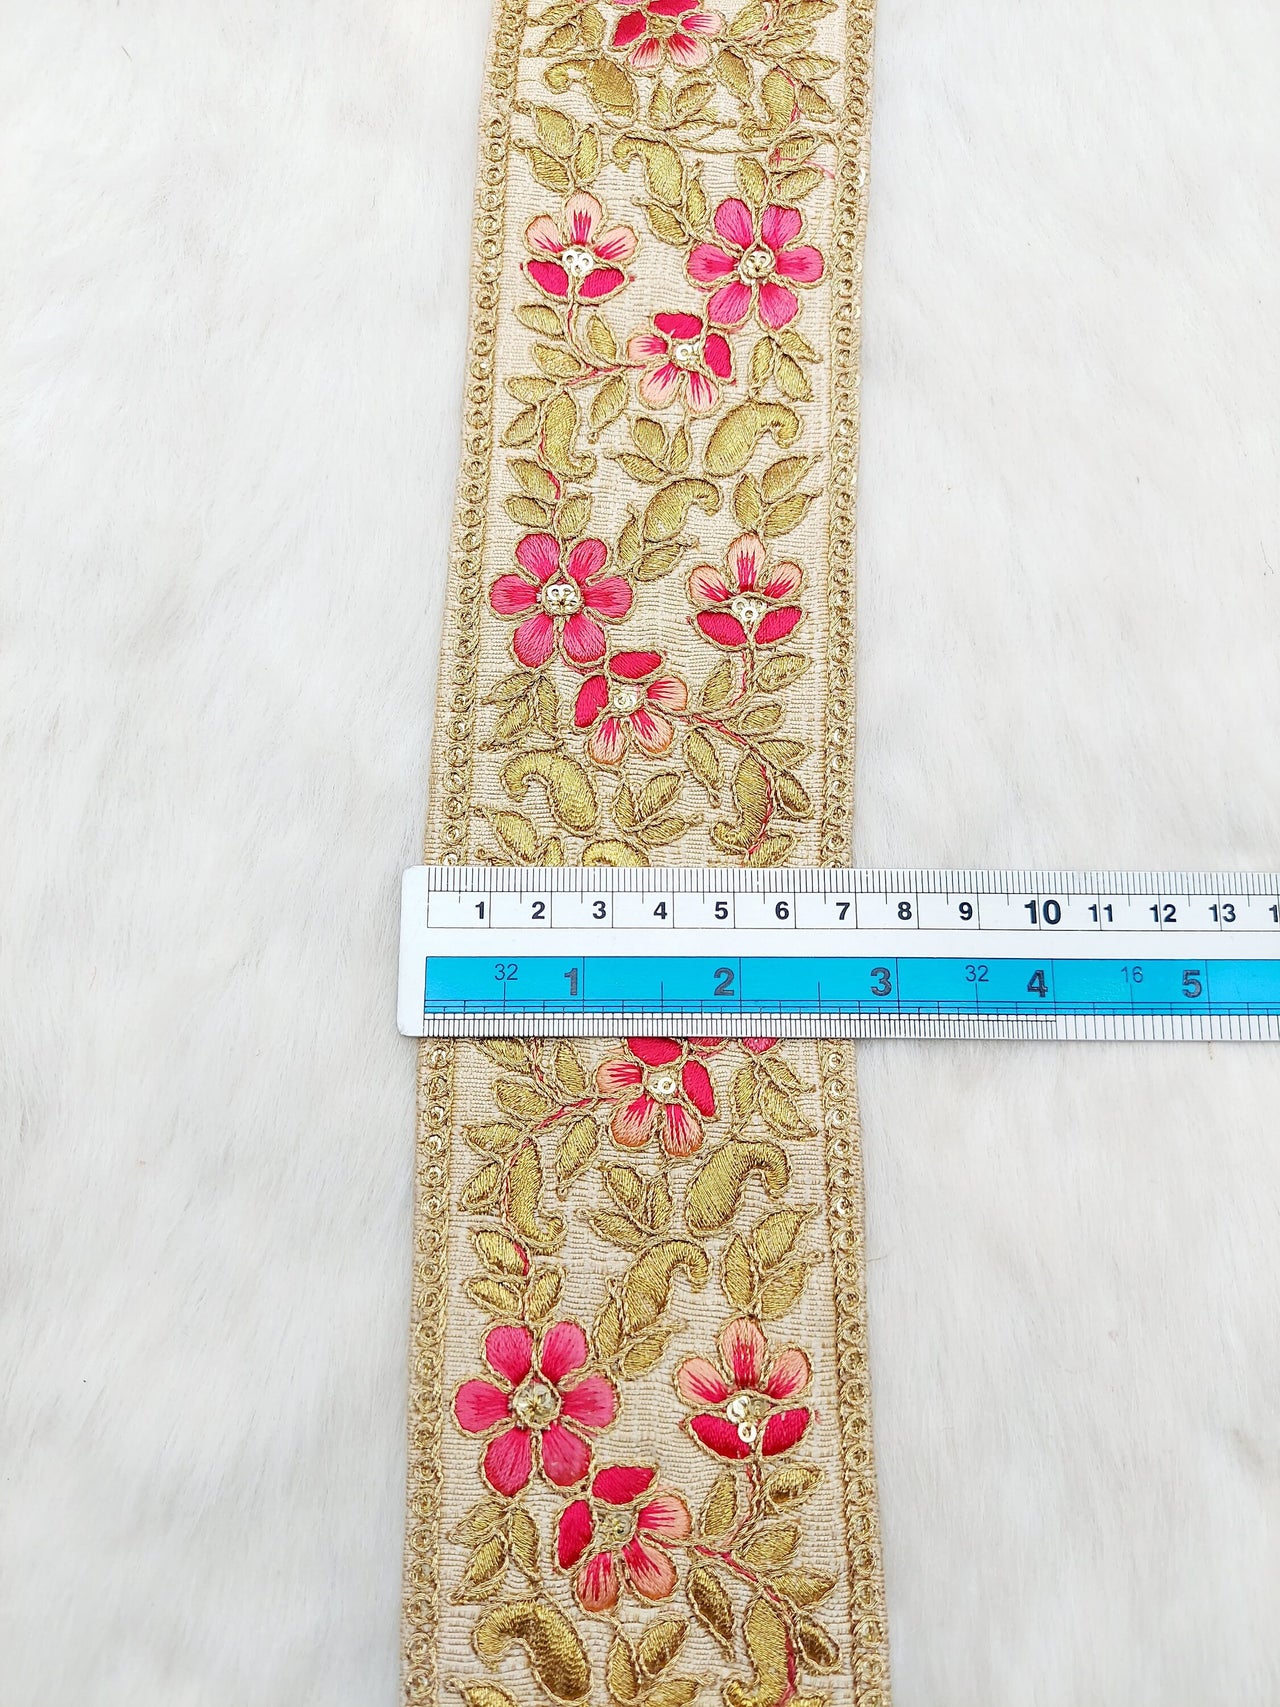 Beige Silk Fabric Trim with Gold and Pink Floral Embroidery, Sari Border Trim, Trim by Yard